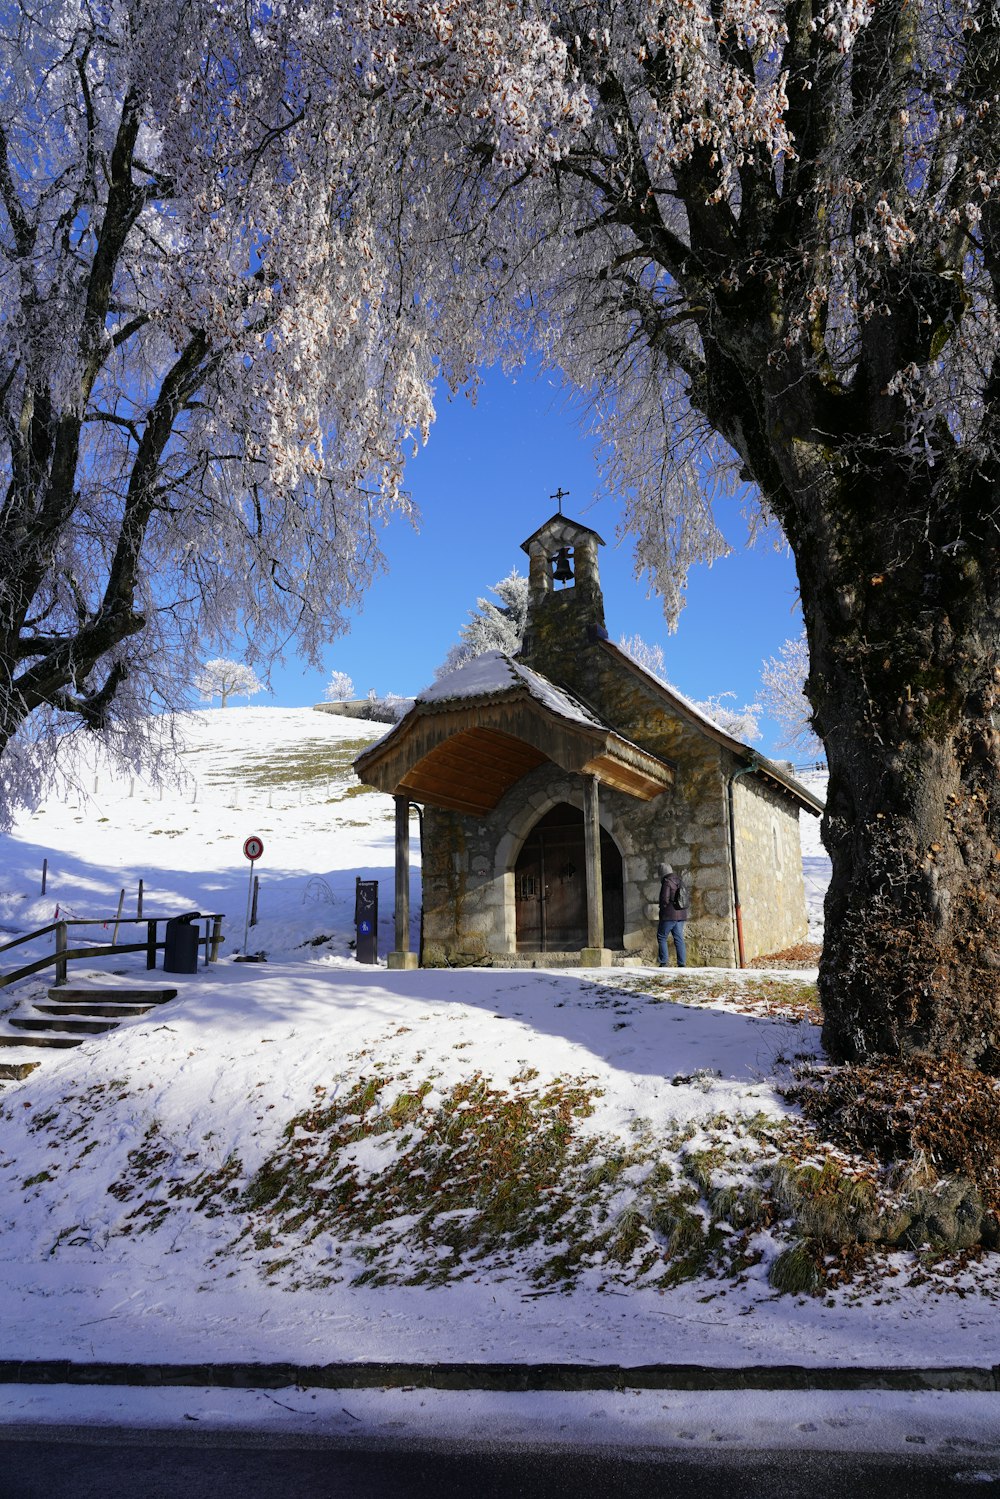 a small church in the middle of a snowy field